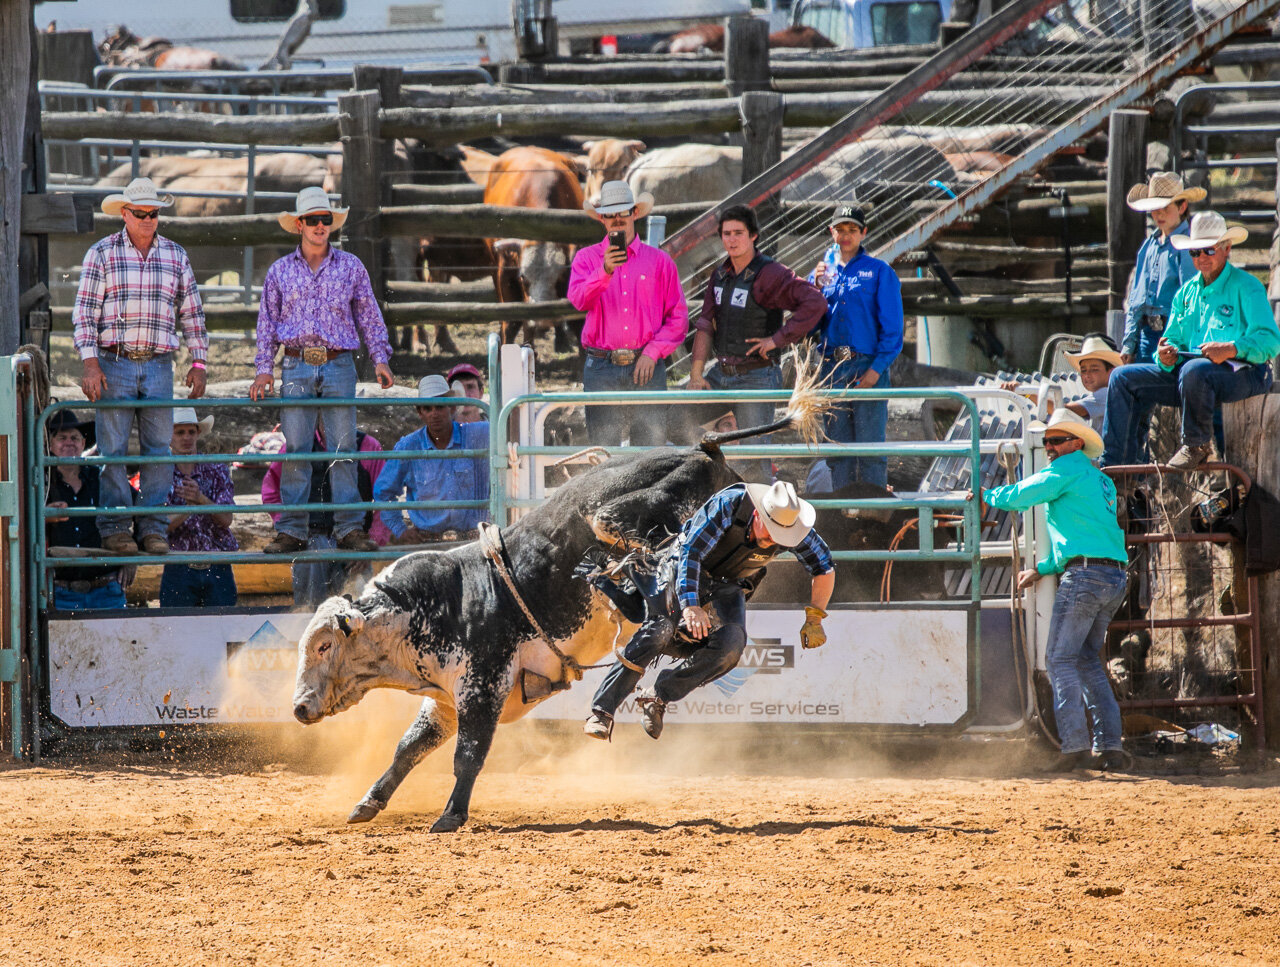 Landing on his feet - a cowboy and bull at the 2019 Rodeo in Boyup Brook, WA